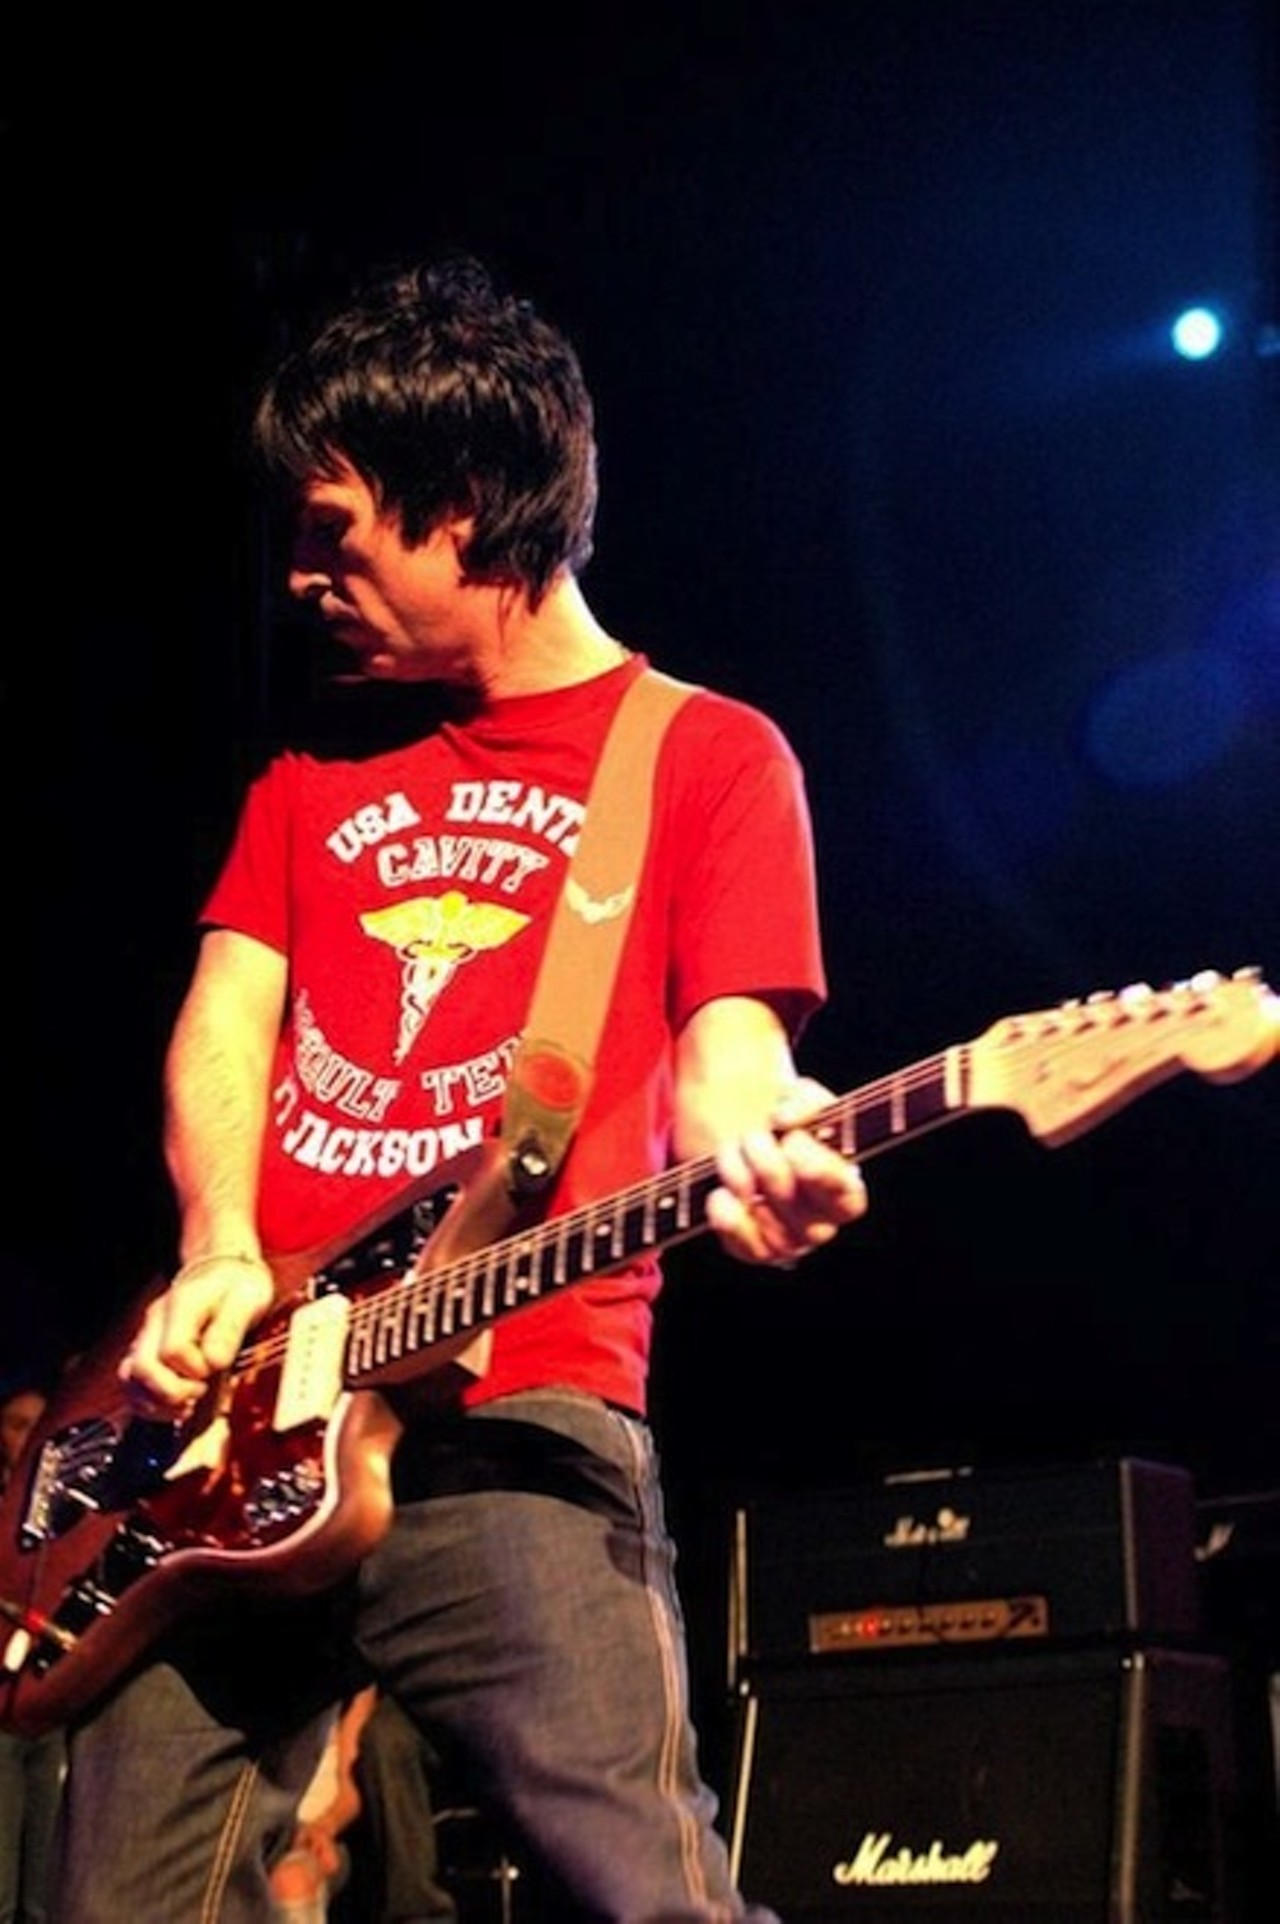 Johnny Marr
Monday, Nov. 25
with Alamar
7 p.m.
The Beacham, 46 N. Orange Ave.
407-246-1419
thebeacham.com
$27.50-$35
How soon is now, because it&#146;s been a long wait since Johnny Marr&#146;s Orlando date was announced, and we&#146;ve been waiting. The former Smiths guitarist is touring on his solo release from this year, The Messenger, which, he explained to Pitchfork, was deliberately written to appeal to his old fans. So perk up your ears for a more beasty incarnation of his pop song-crafting and give new single &#147;Upstarts&#148; a spin if you have yet to. Glancing at his recent setlists, his live show is similarly catering to folks still tightly clutching their copies of Meat Is Murder, because it seems you&#146;re sure to hear hit songs like &#147;How Soon Is Now?&#148; as well as singles and B-sides like &#147;Panic&#148; and &#147;Please, Please, Please, Let Me Get What I Want.&#148; Sorry for the potential spoilers; looks like bigmouth strikes 
again. &#150; Ashley Belanger